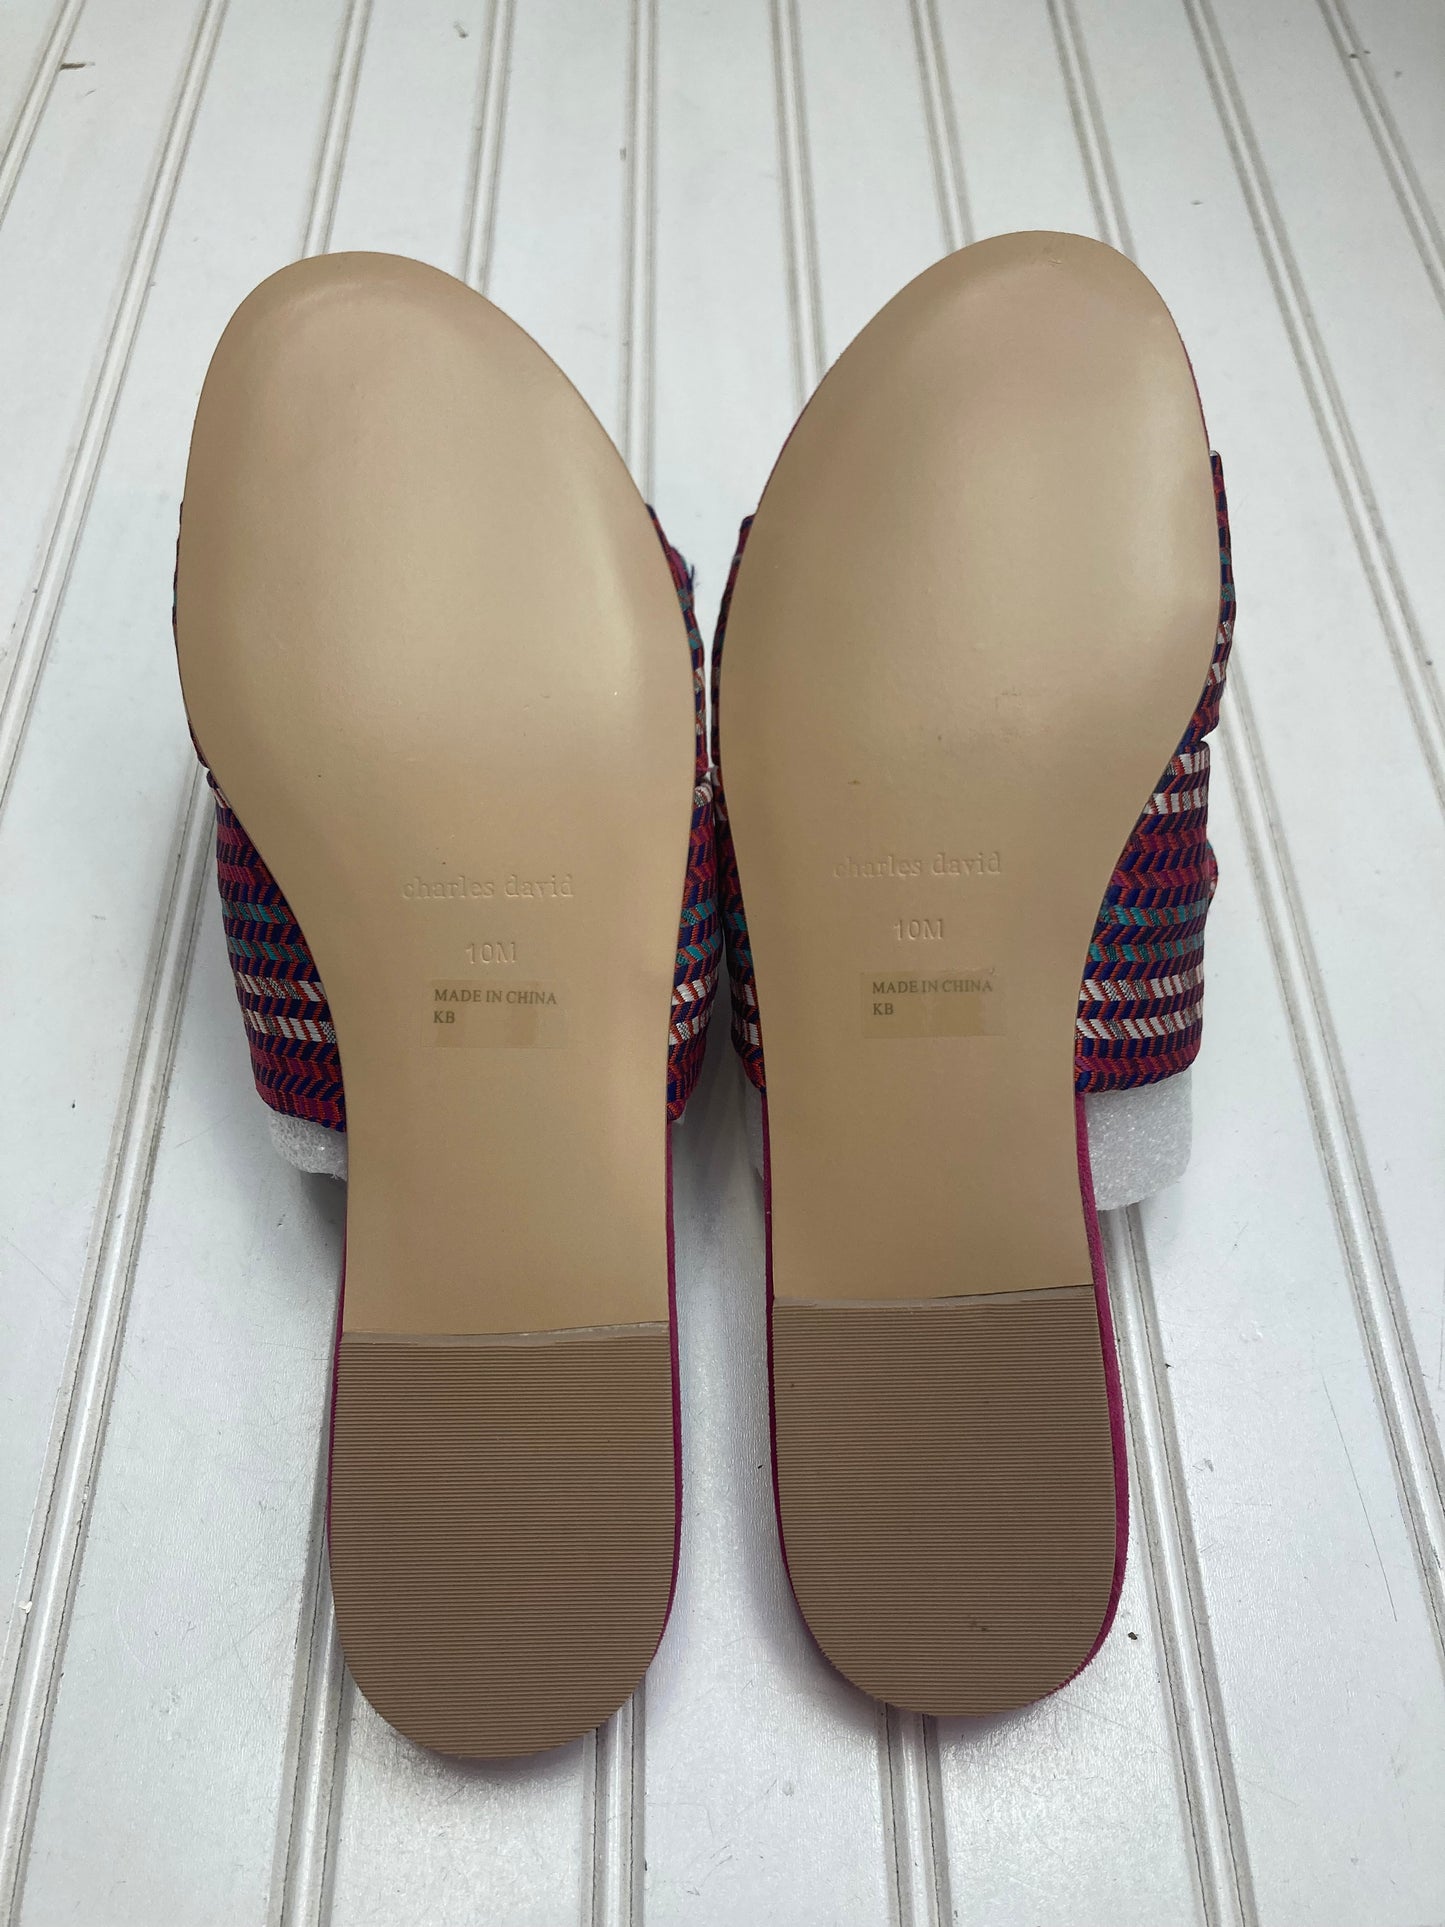 Sandals Flats By Charles David  Size: 10